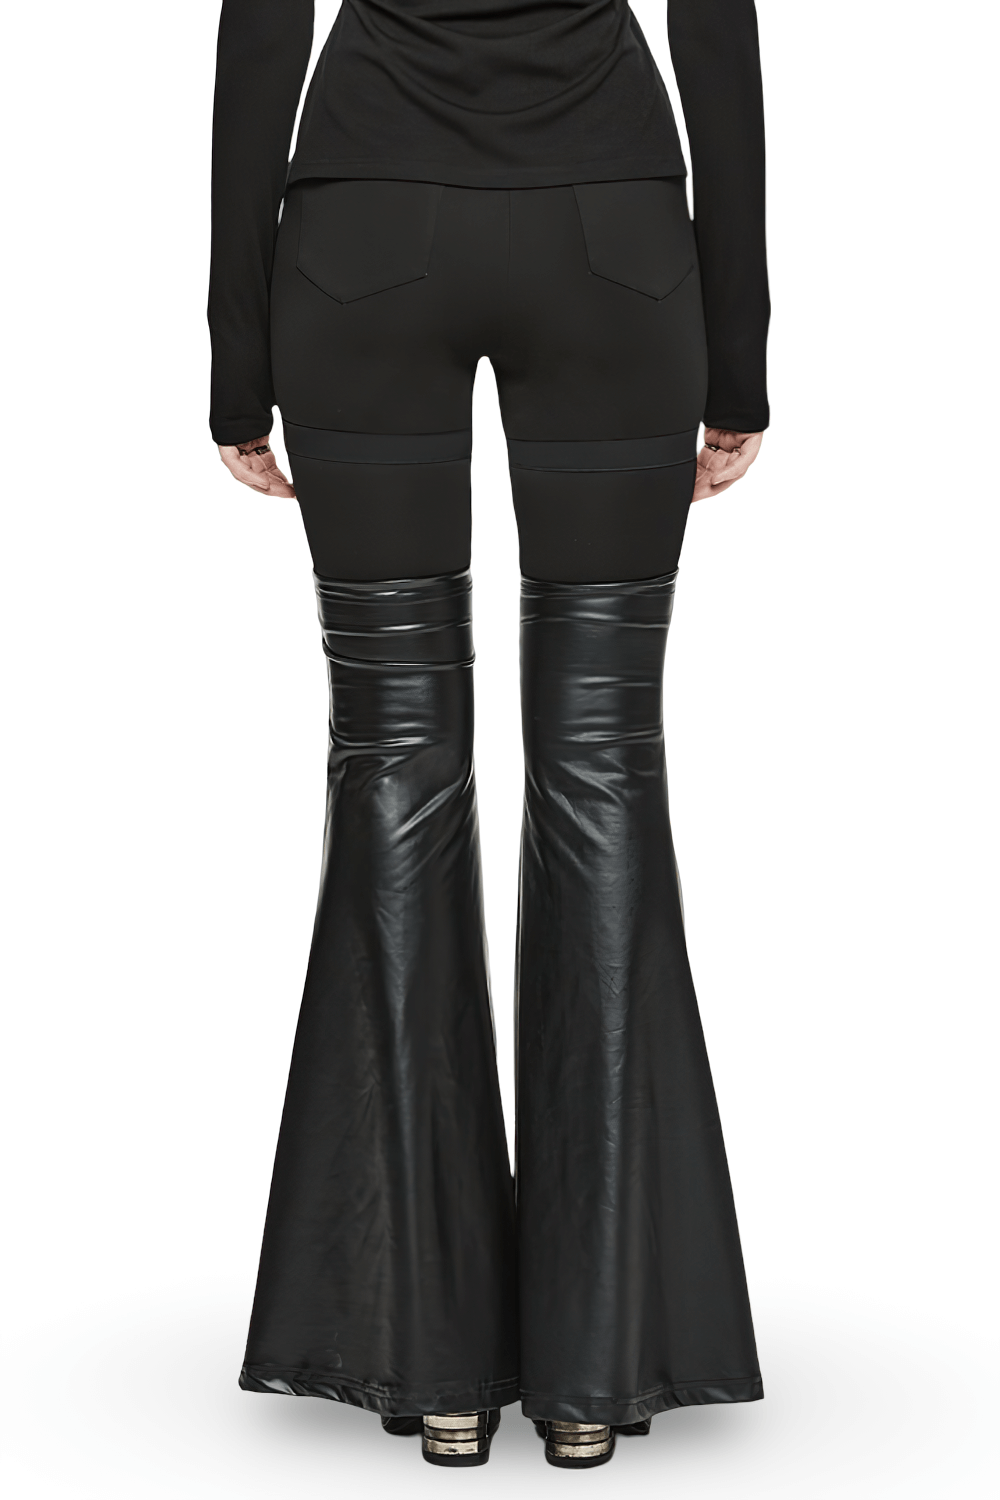 CLEARANCE of Punk Detachable Faux Leather Flared Leg Warmer Pants - US